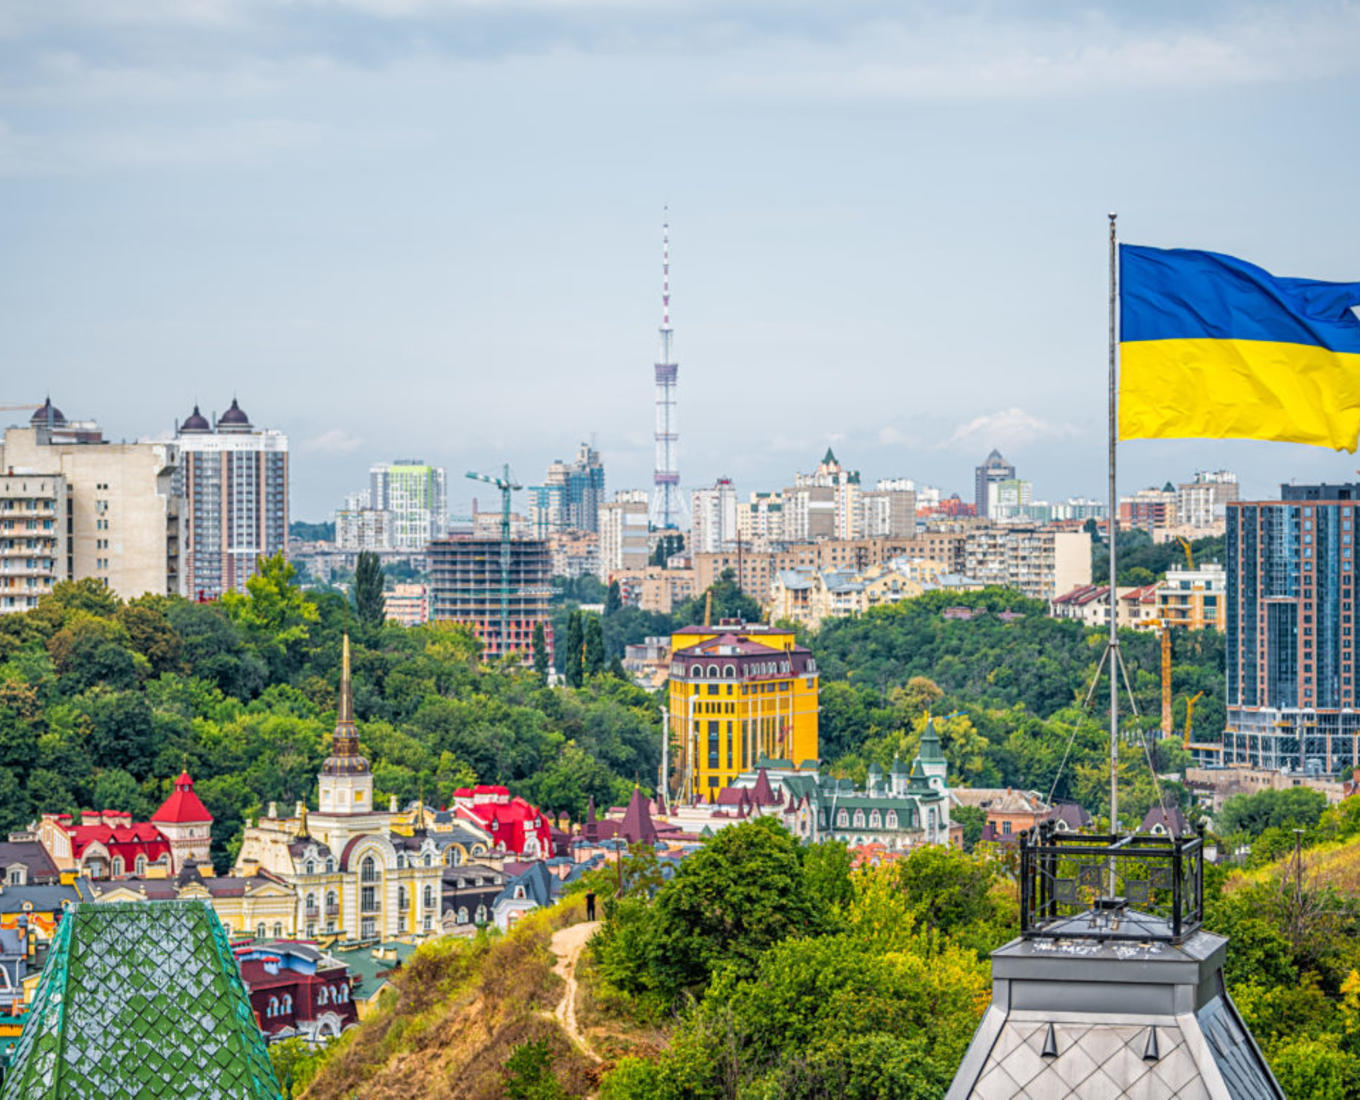 cityscape of Kiev and Ukrainian flag waving in the wind